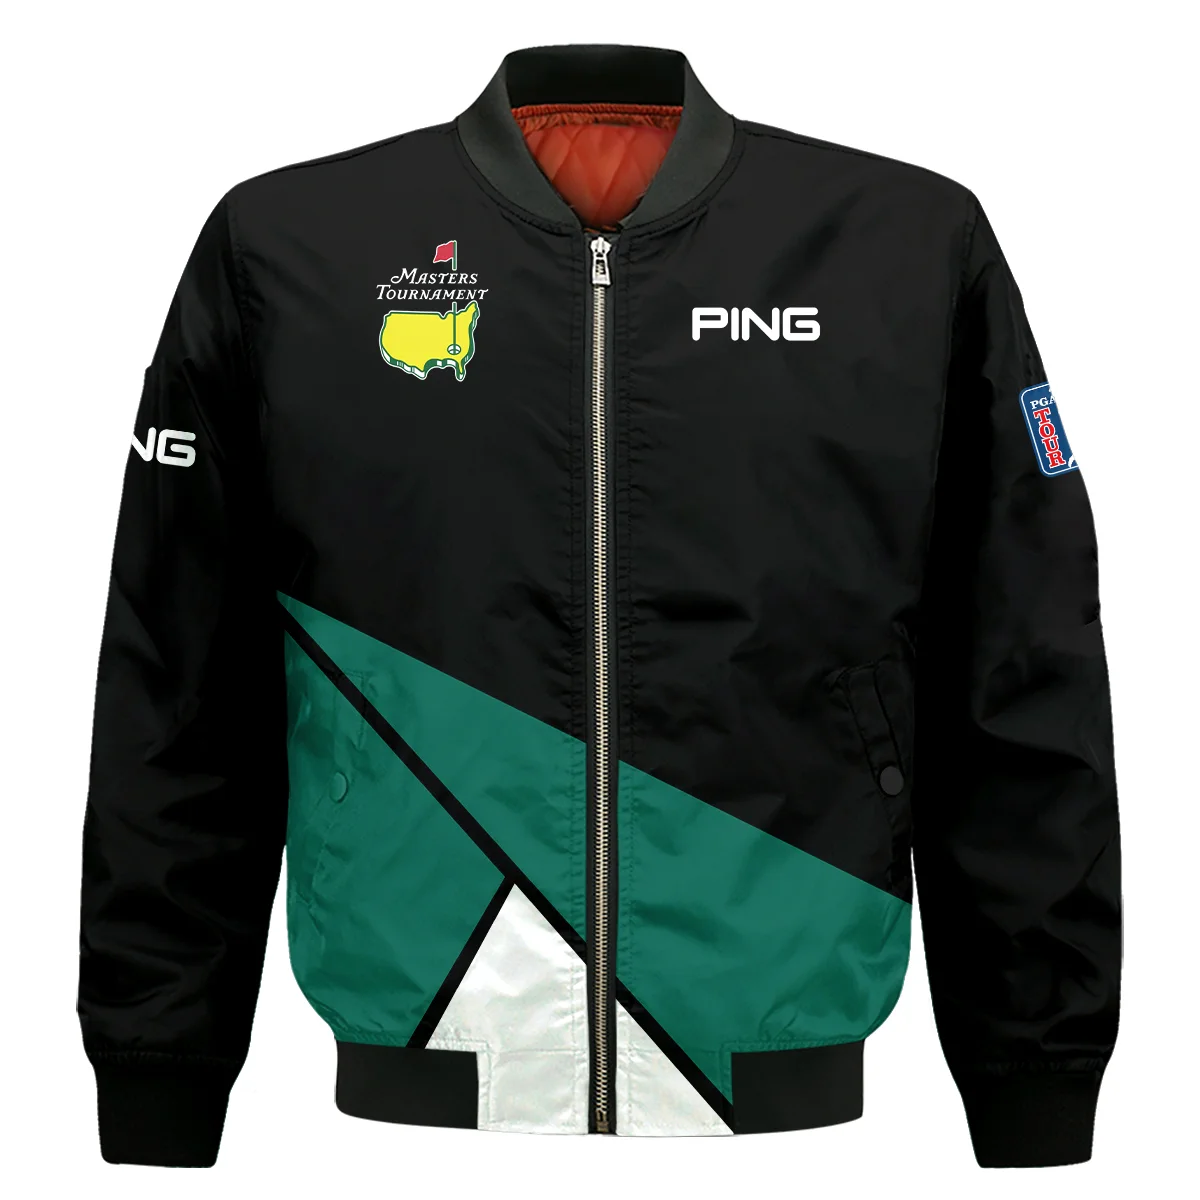 Golf Masters Tournament Ping Bomber Jacket Black And Green Golf Sports Bomber Jacket GBJ1378